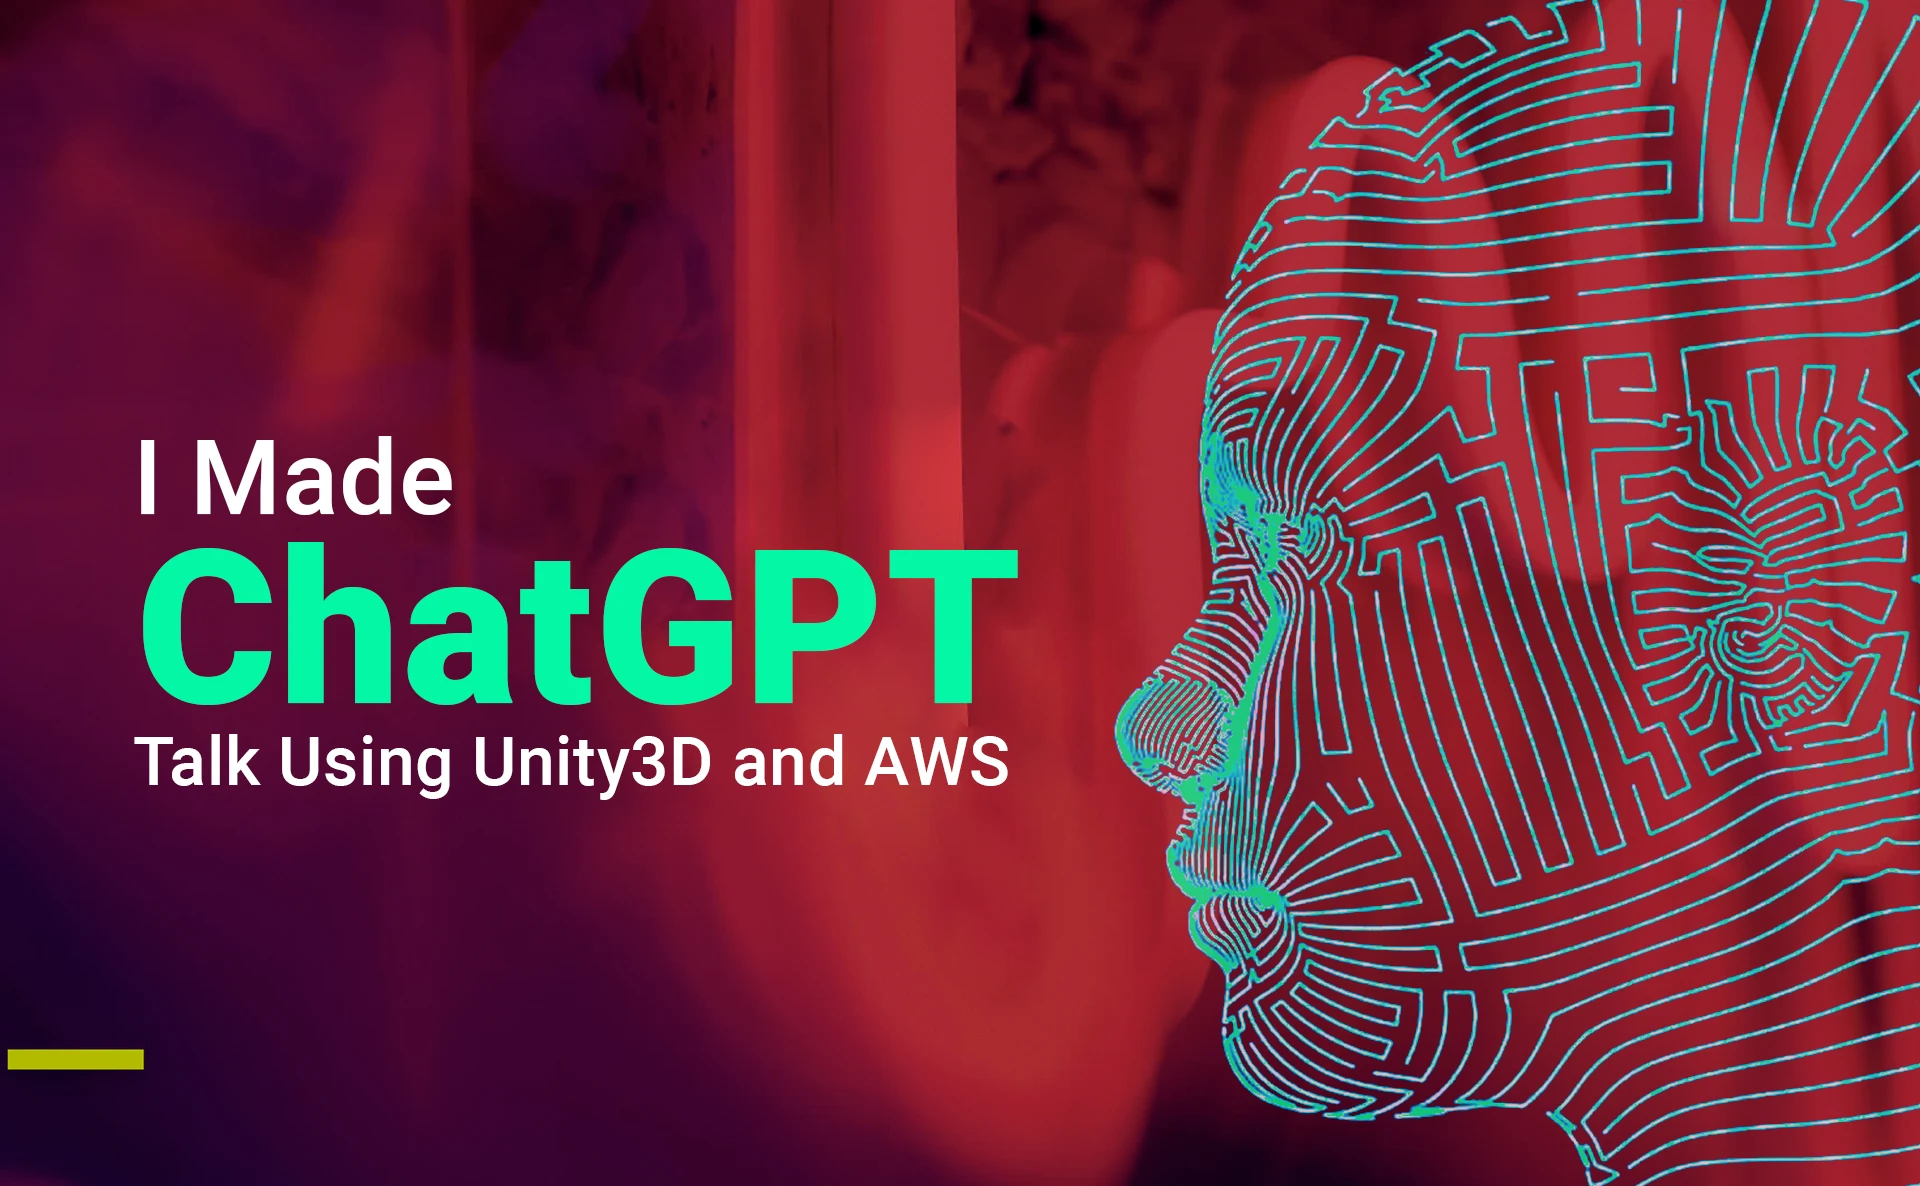 I made ChatGPT talk using Unity3D and AWS